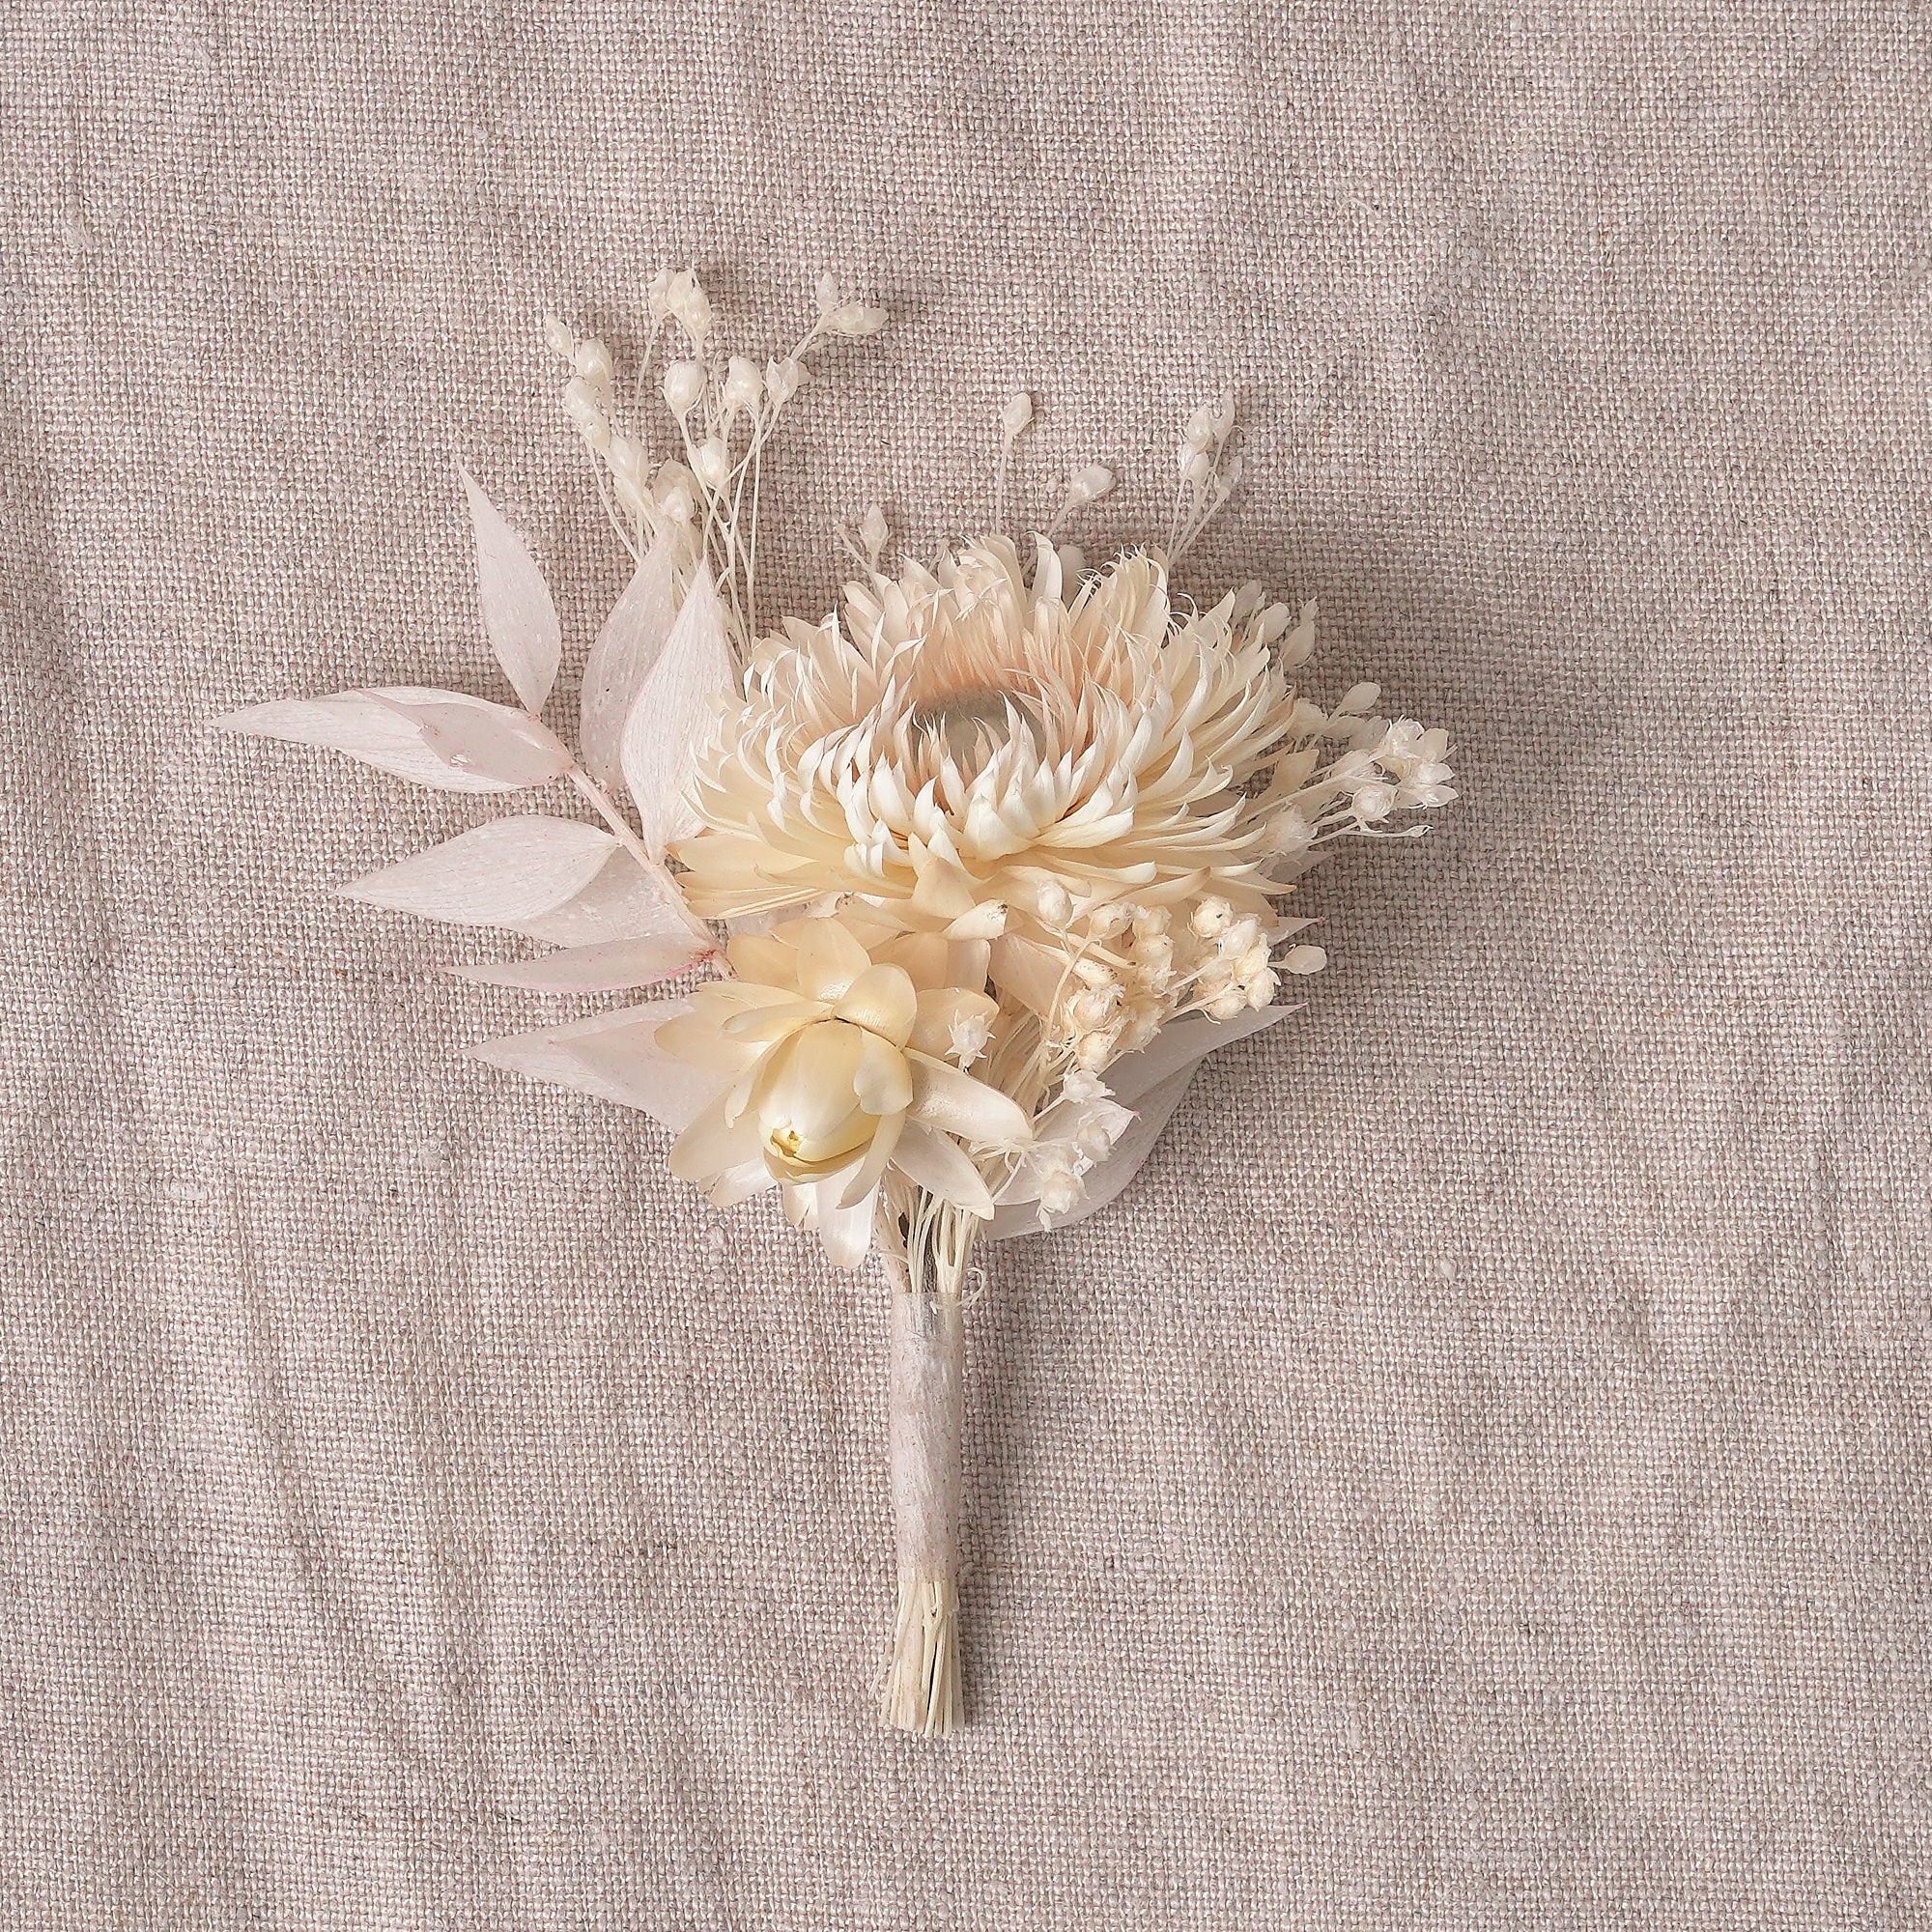 Everlasting Whites Dried Flower Buttonhole